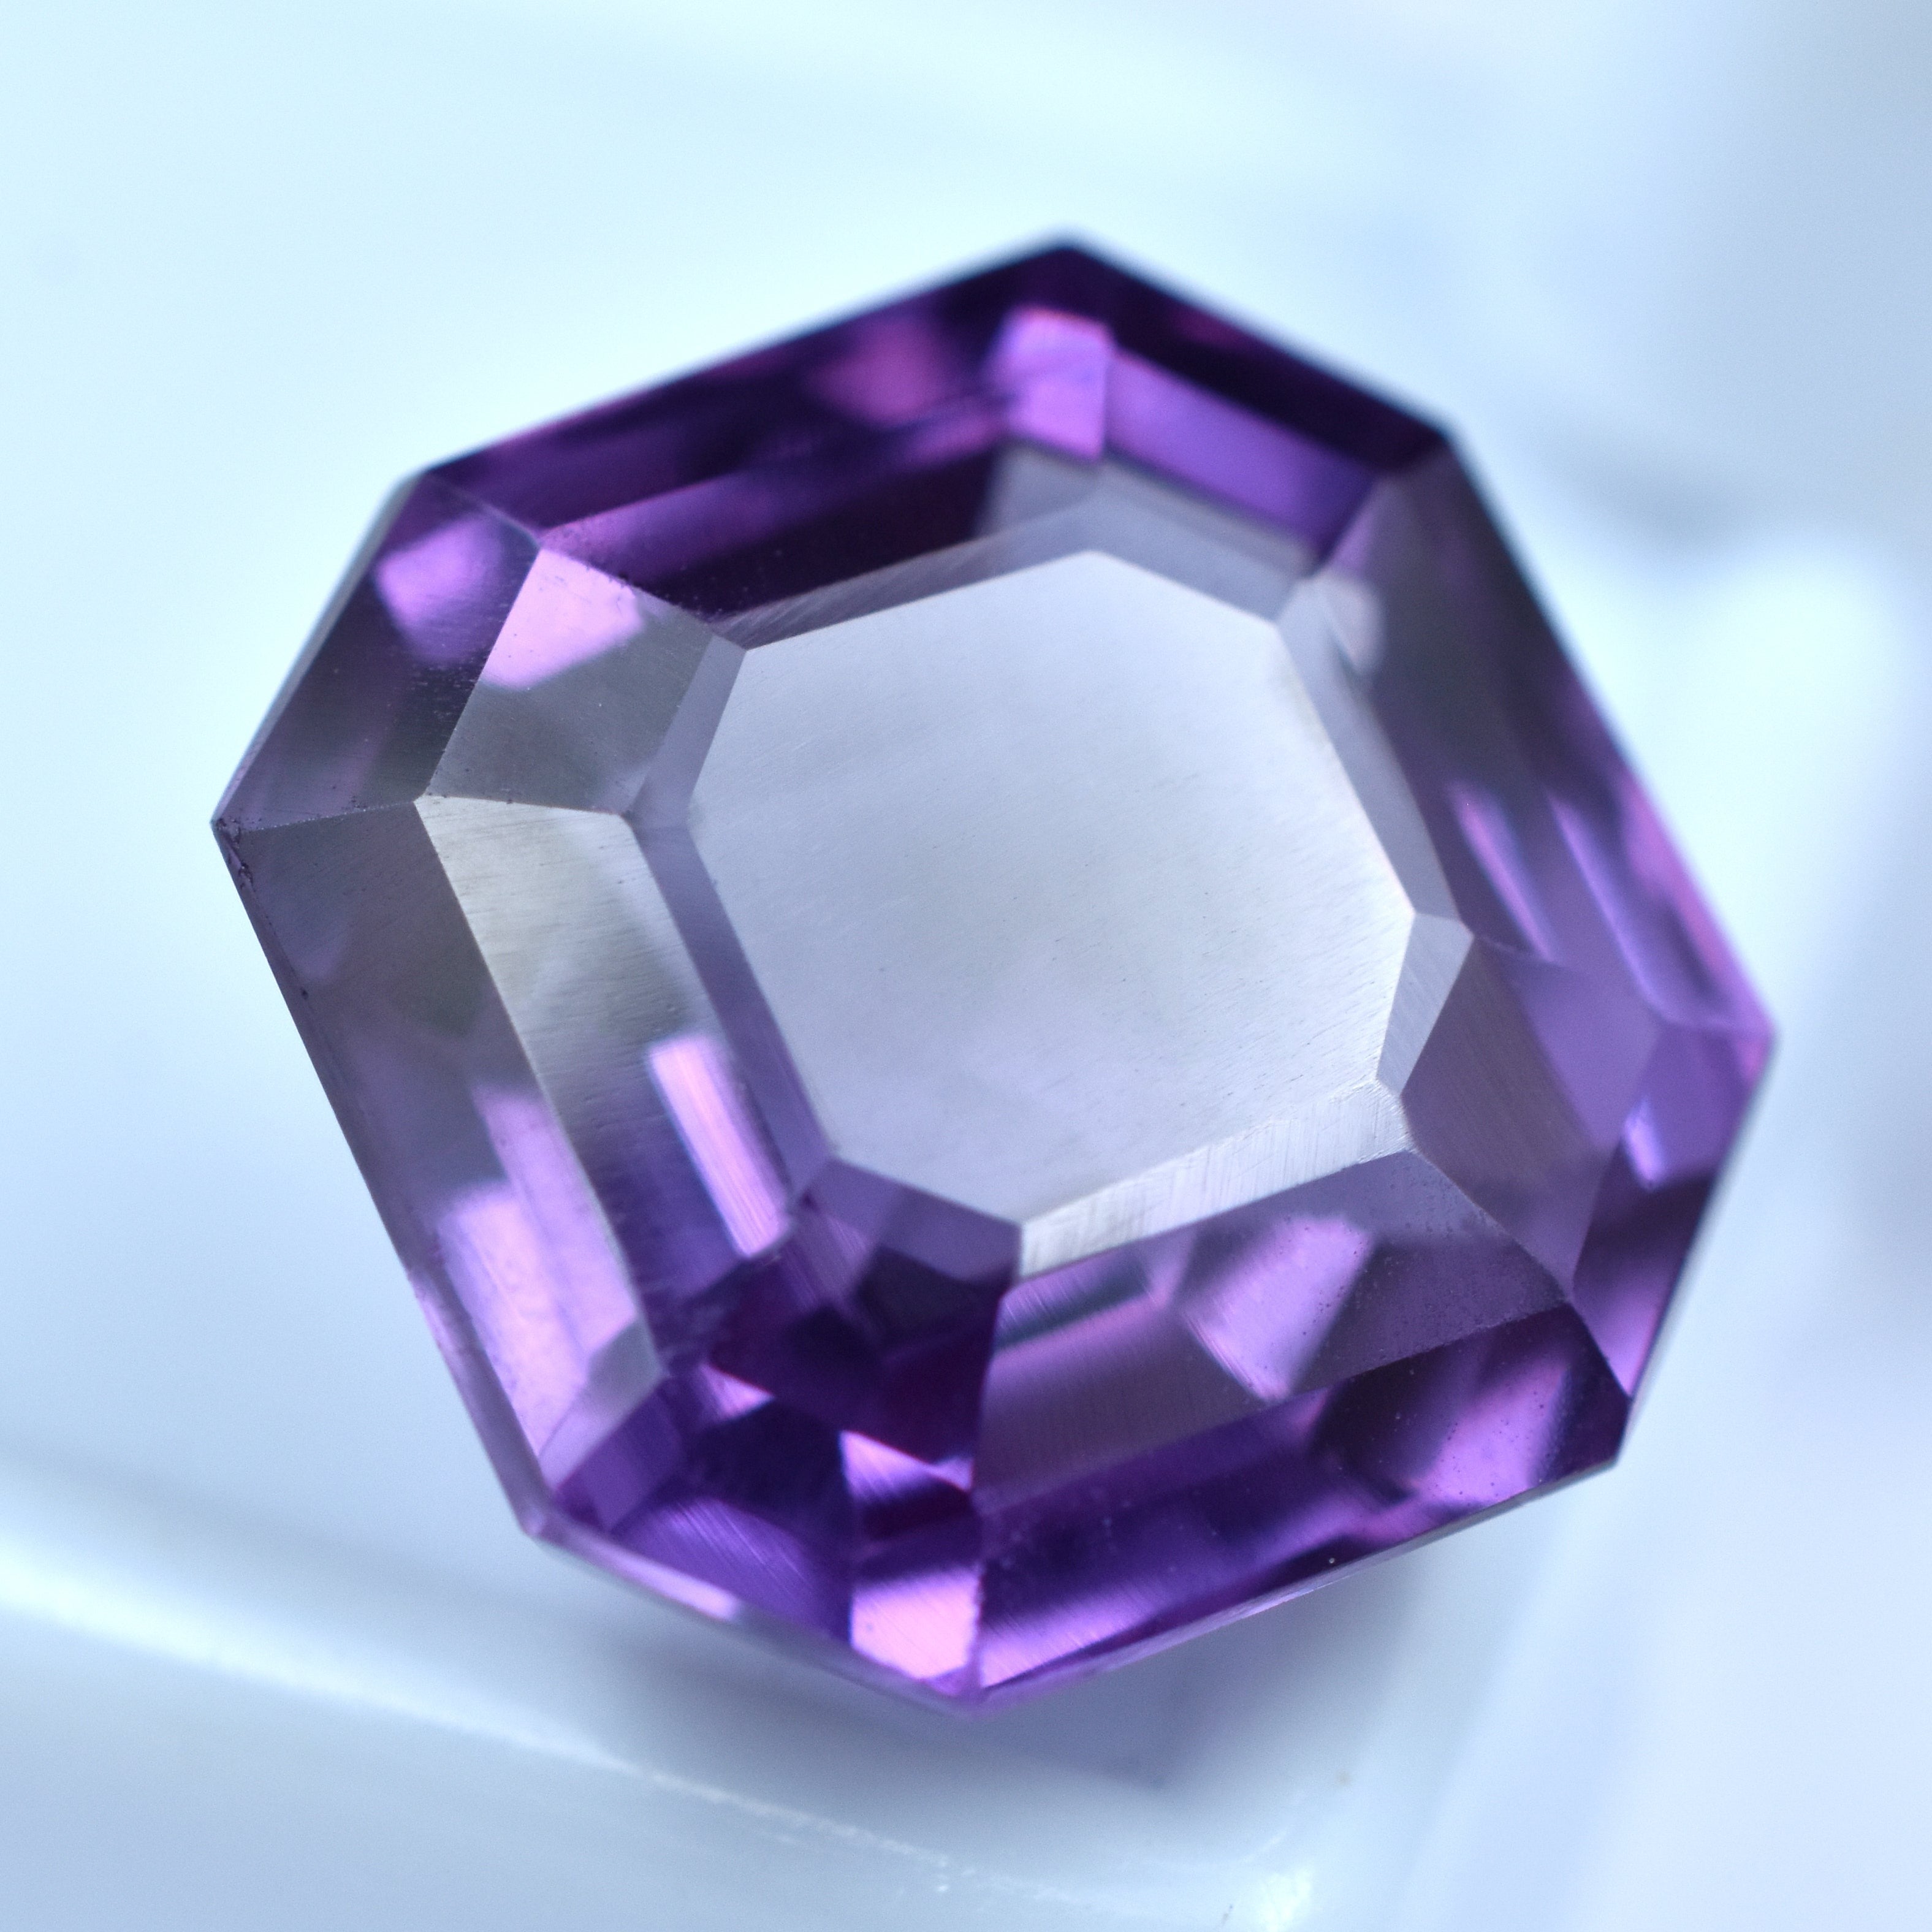 ON SALE- SAPPHIRE GEM !!! Color Change 10.52 Ct Beautiful Purple Sapphire Natural Loose Gem From Sri Lanka Have Best Collection | For Jewelry | Demanding Sapphire Gem | Free Delivery Free Gift